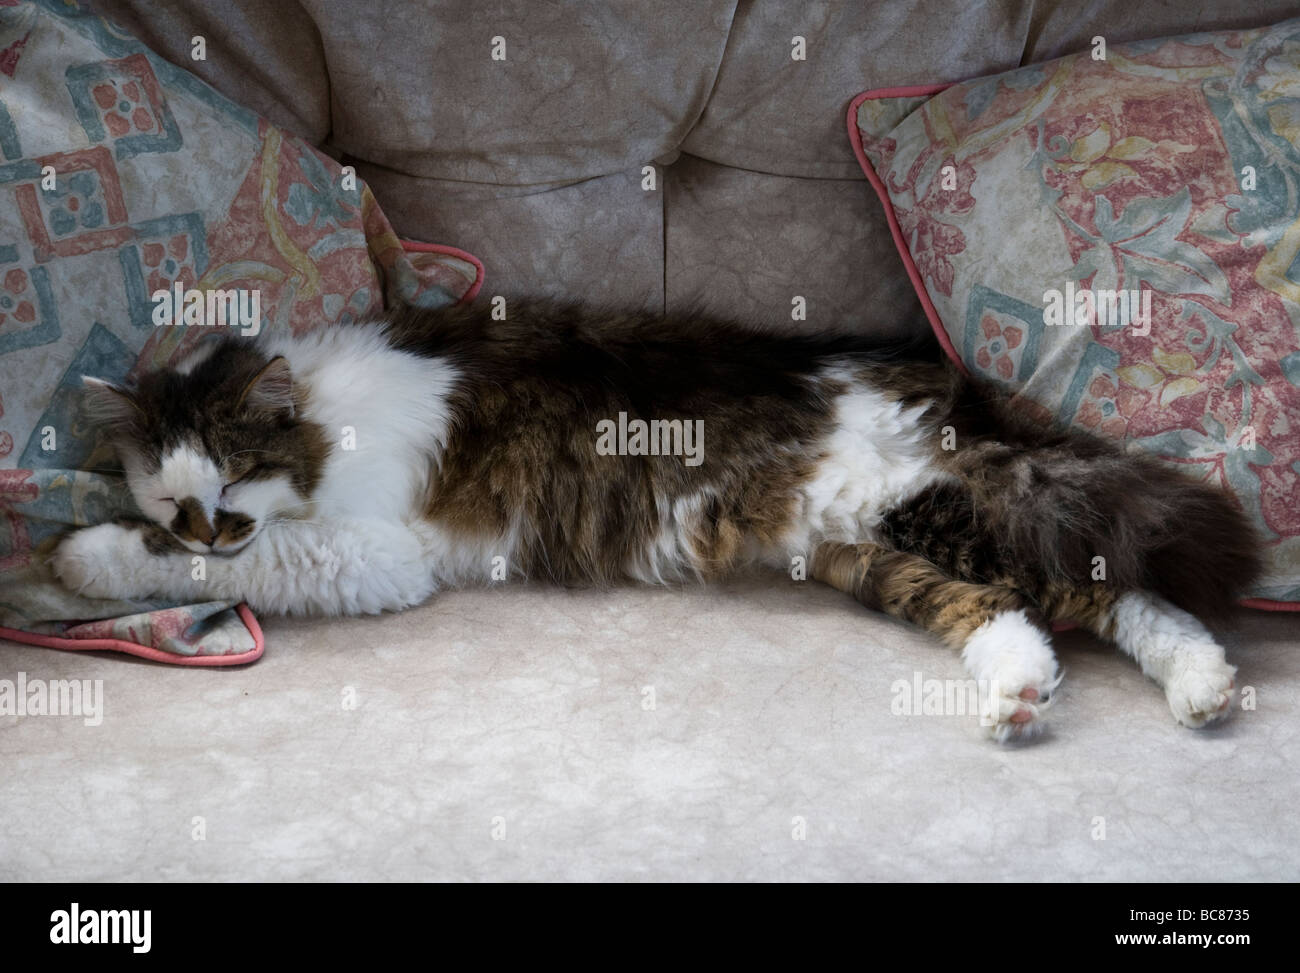 A sleeping cat, stretched out, on a sofa with cushions. Stock Photo